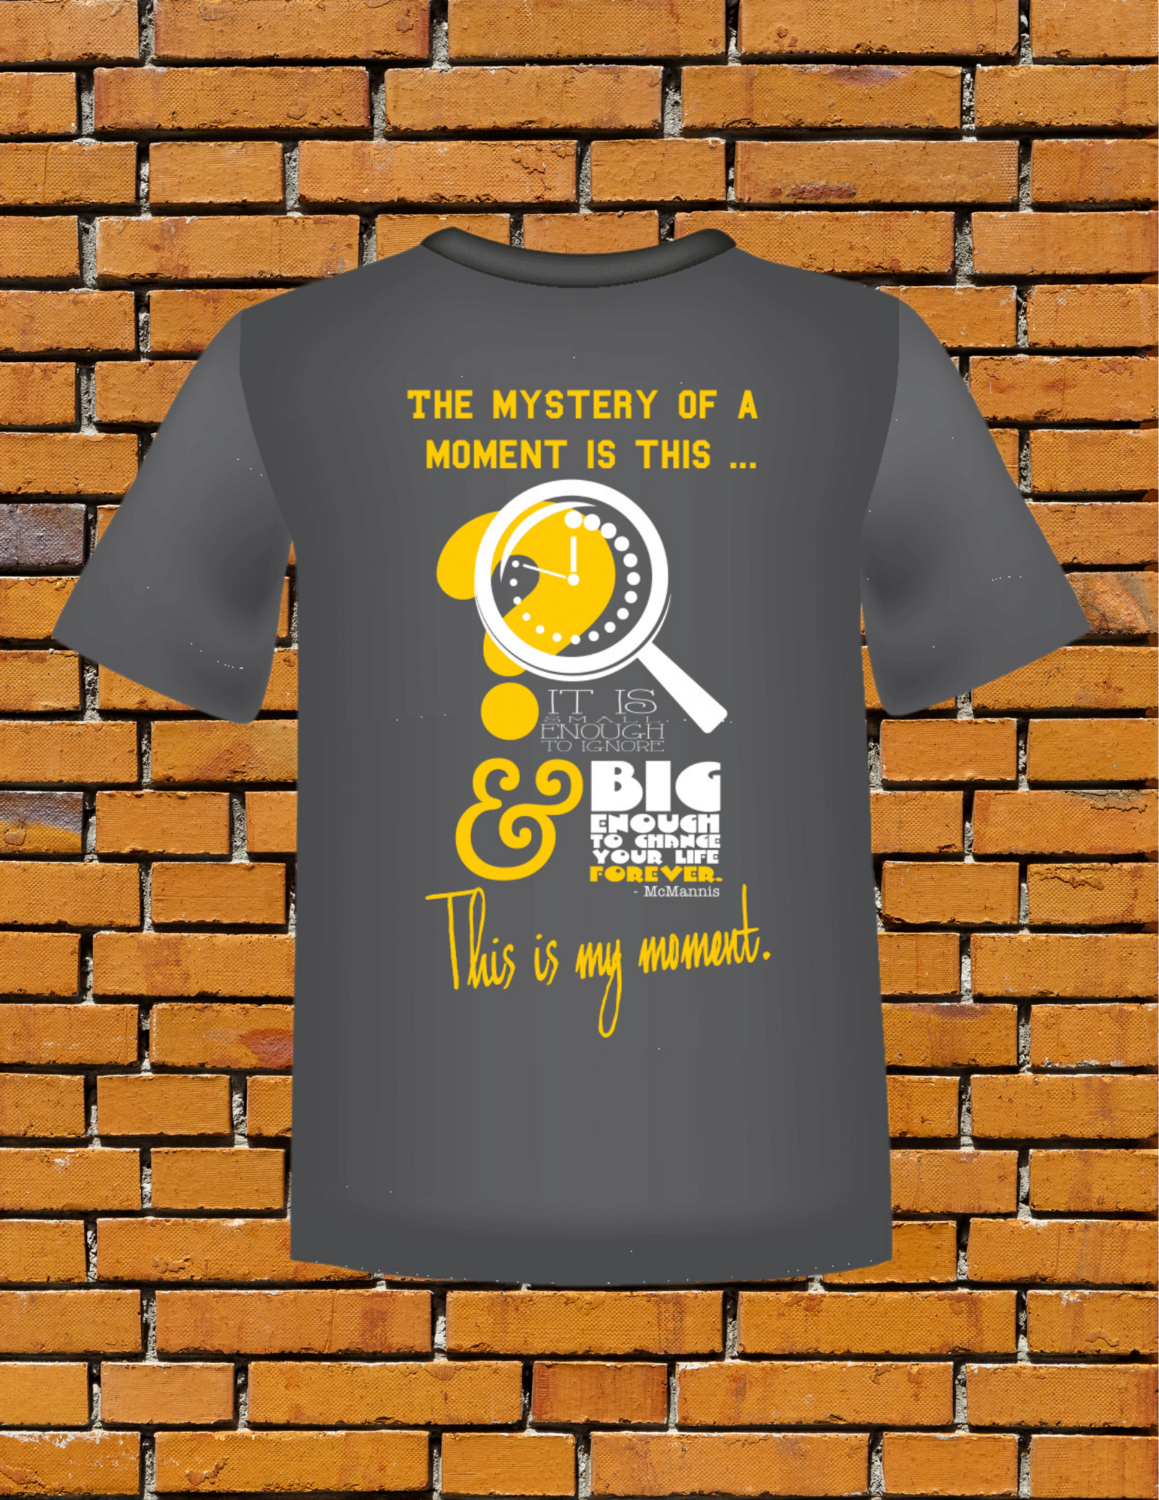 2017 Identify Team T-Shirt - The Mystery of the Moment